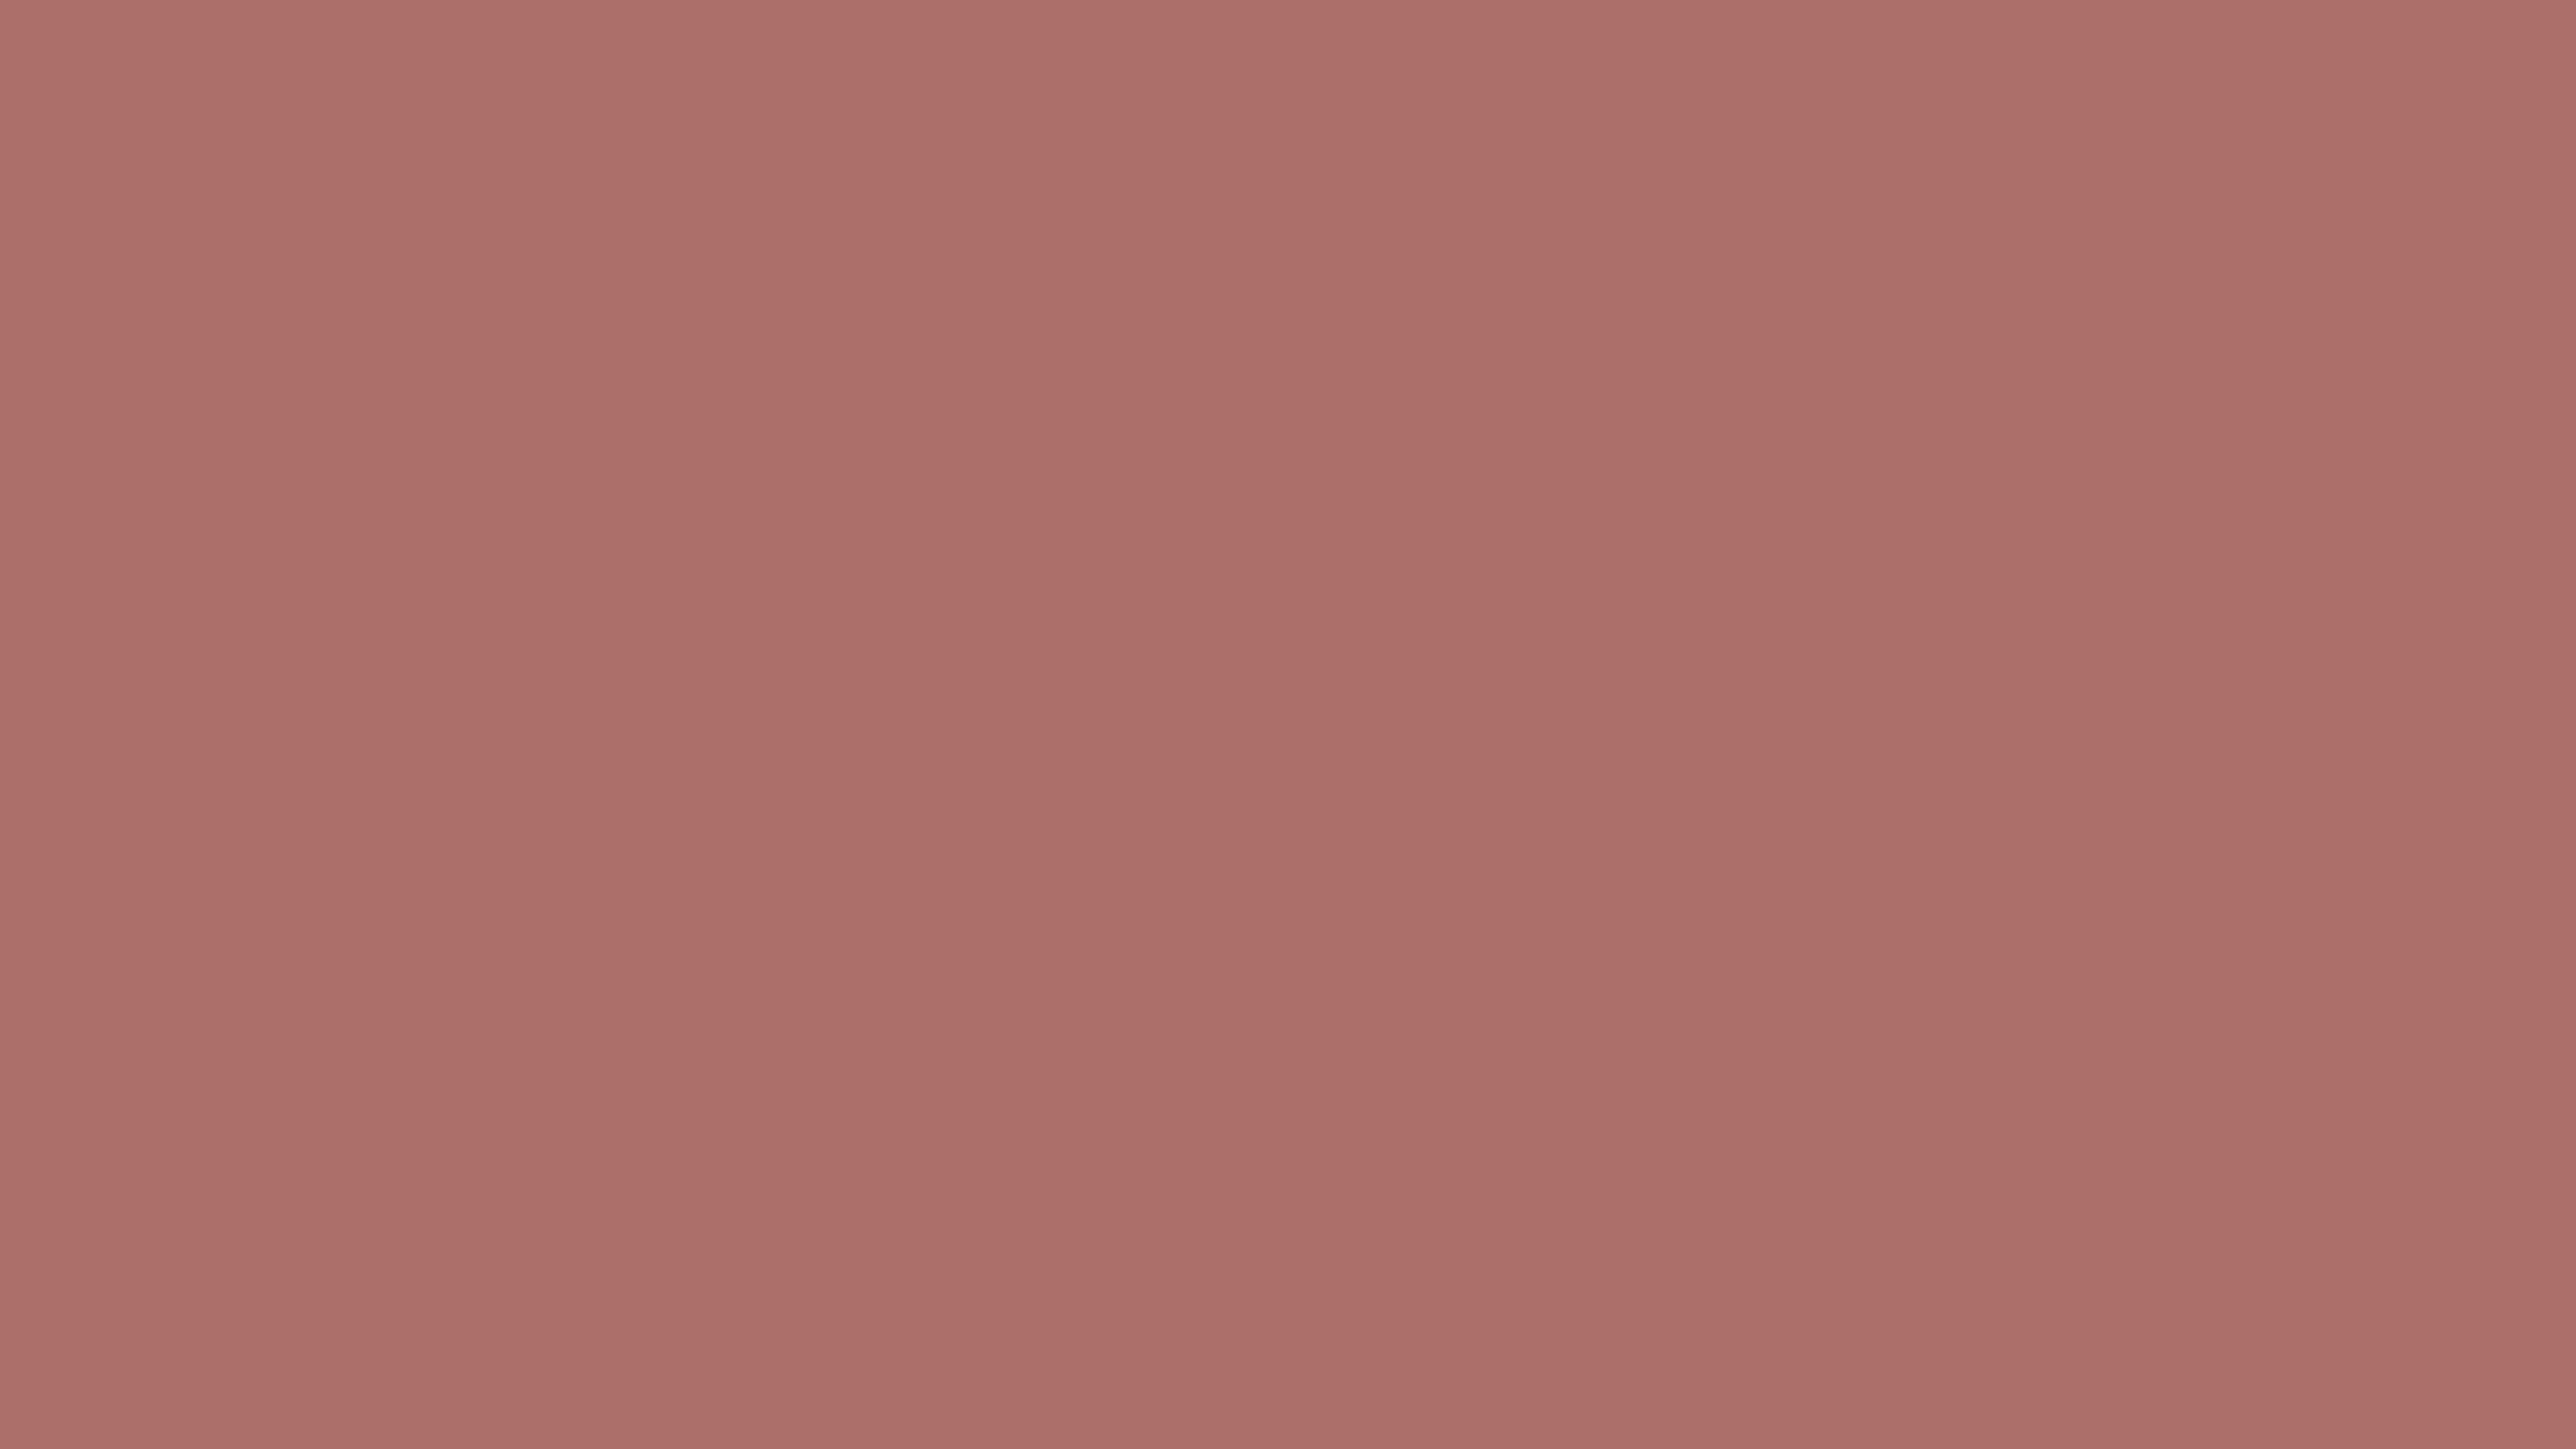 7680x4320 Copper Penny Solid Color Background